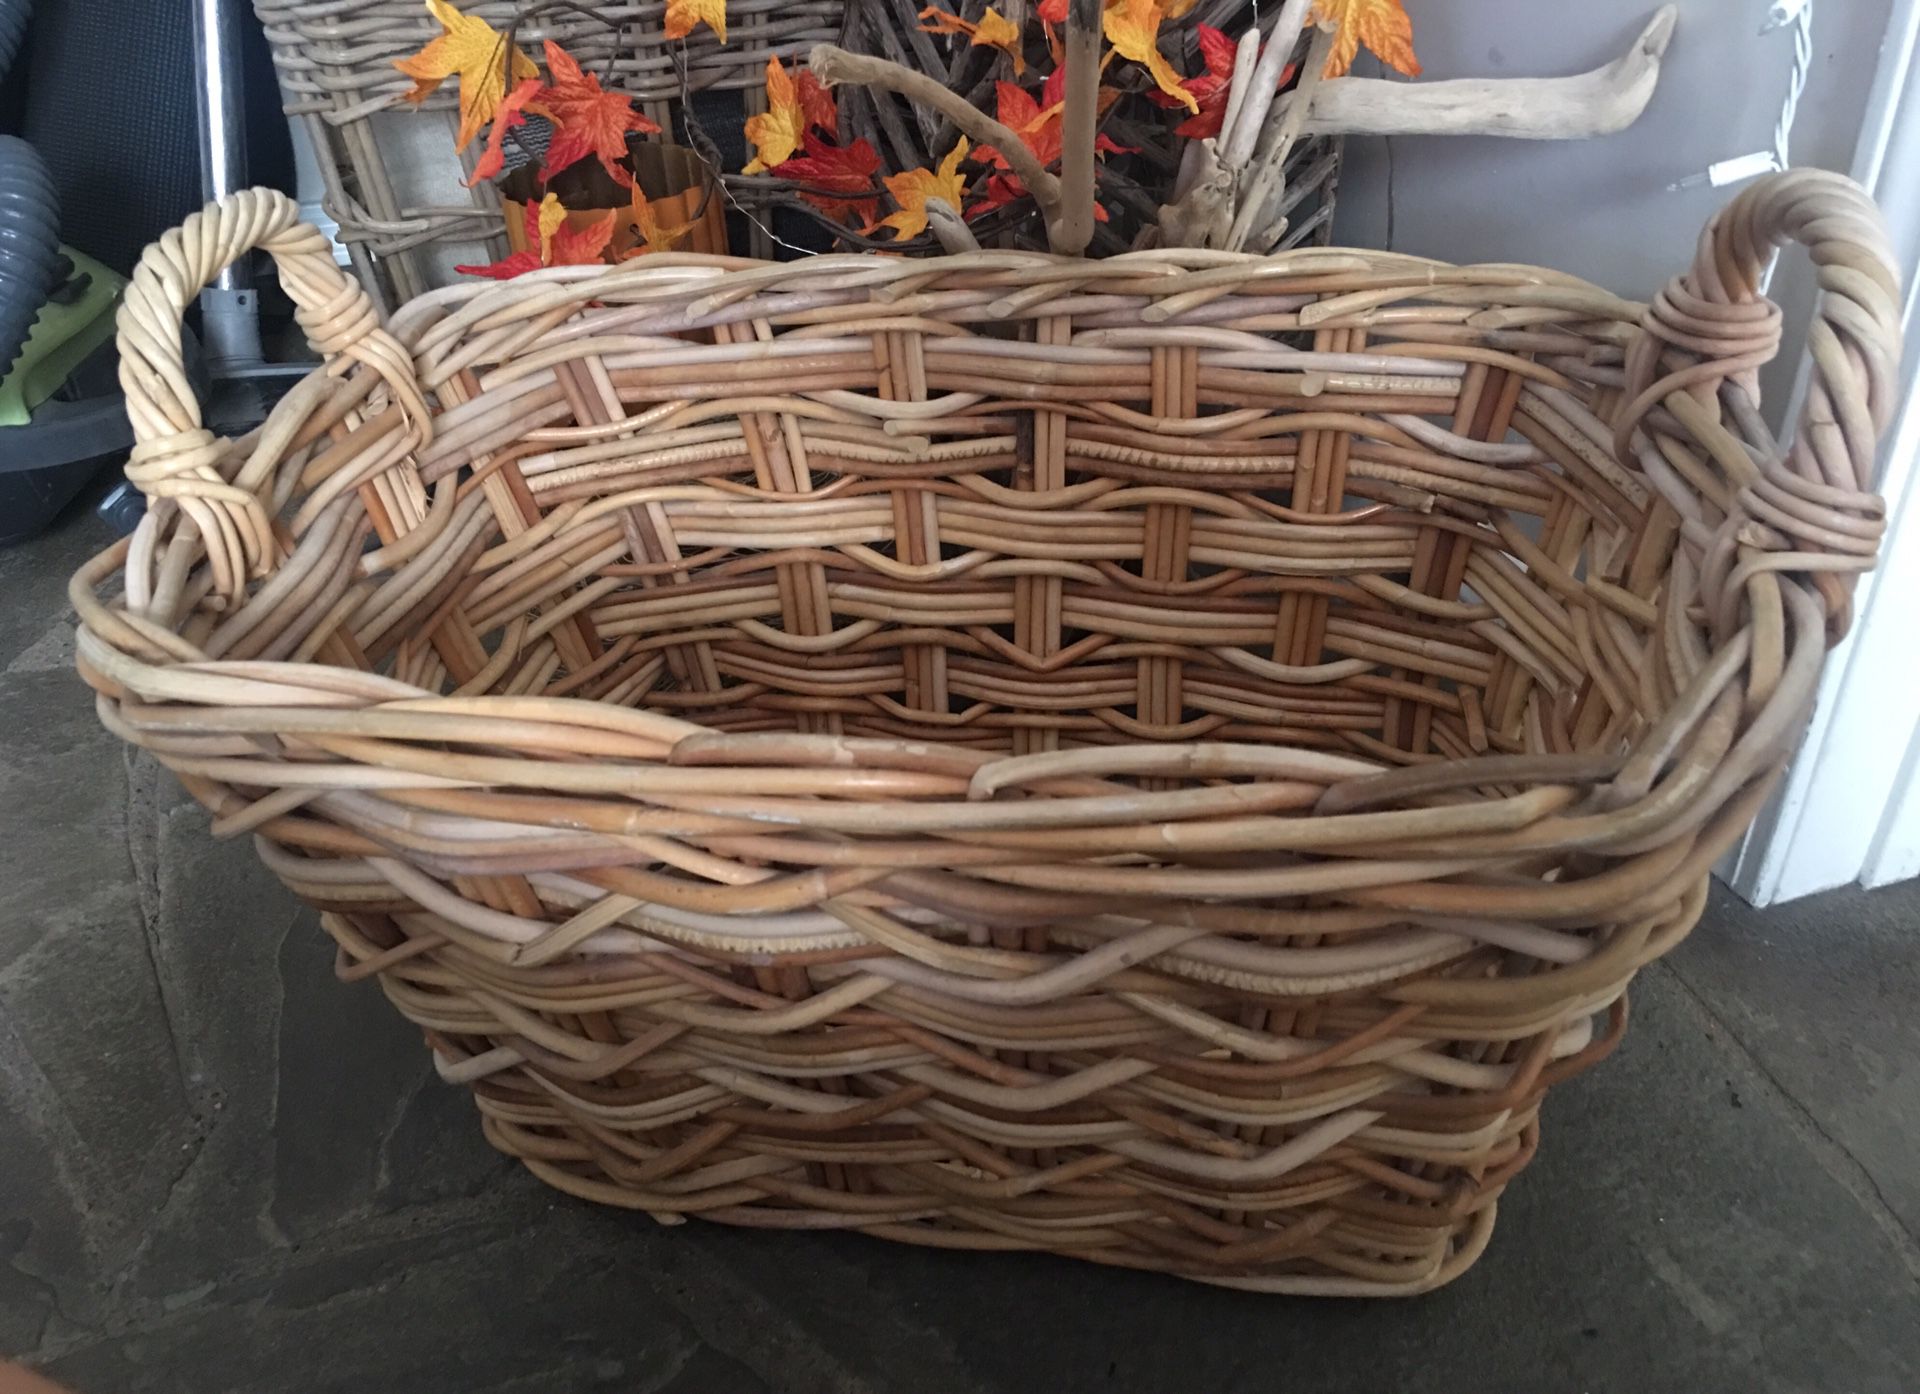 Cute chic cottage wicker medium size basket from Pottery Barn